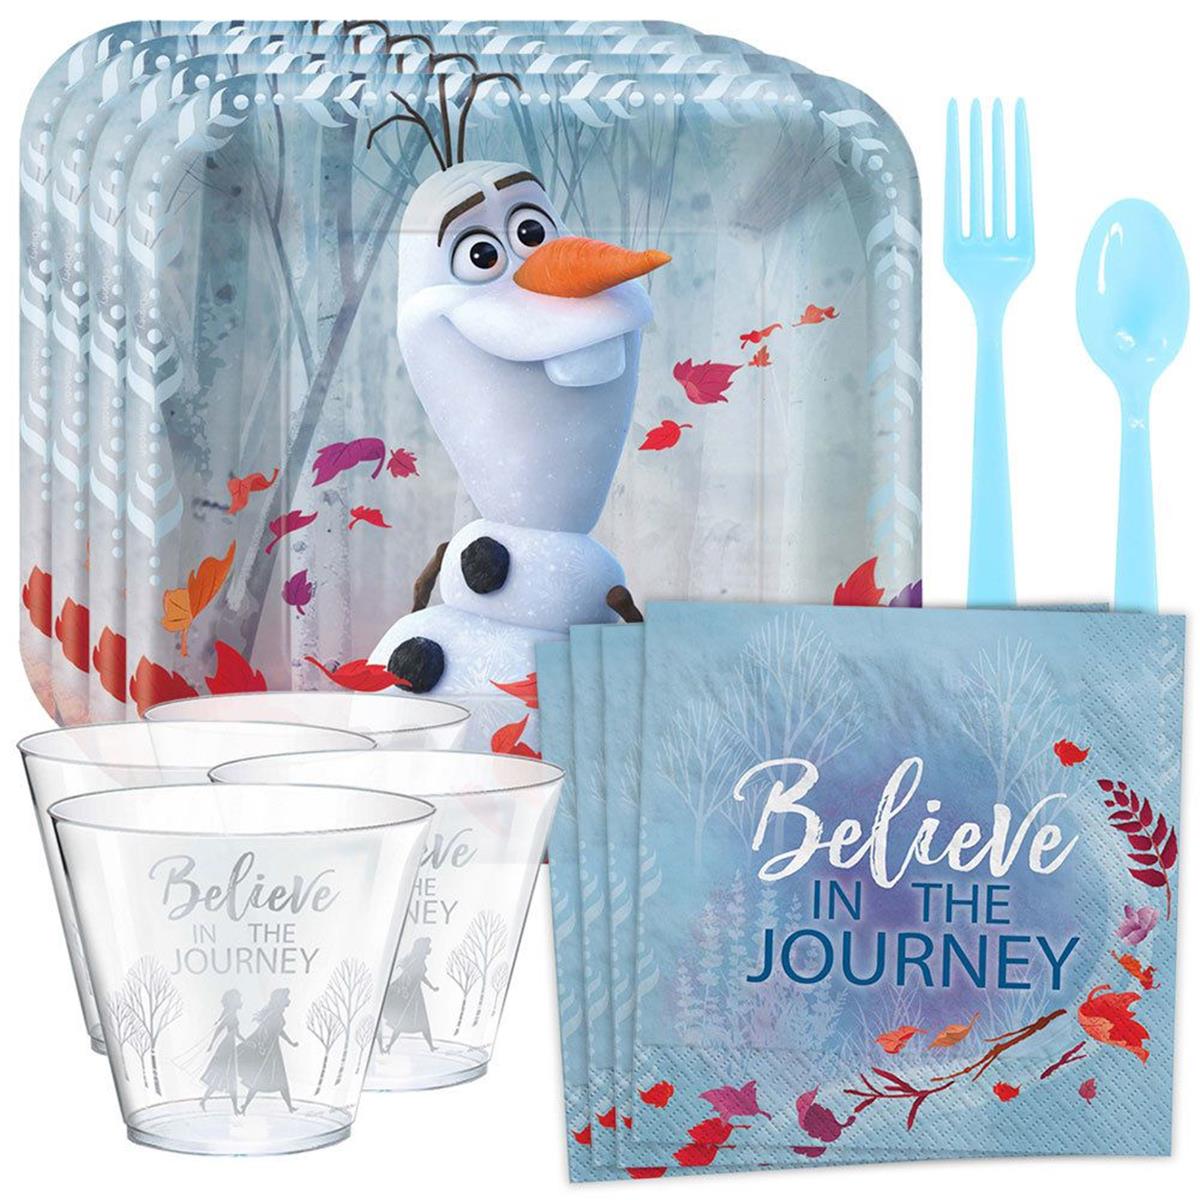 Picture of Birth9999 625381 Frozen 2 Tableware Kit - Serves 8